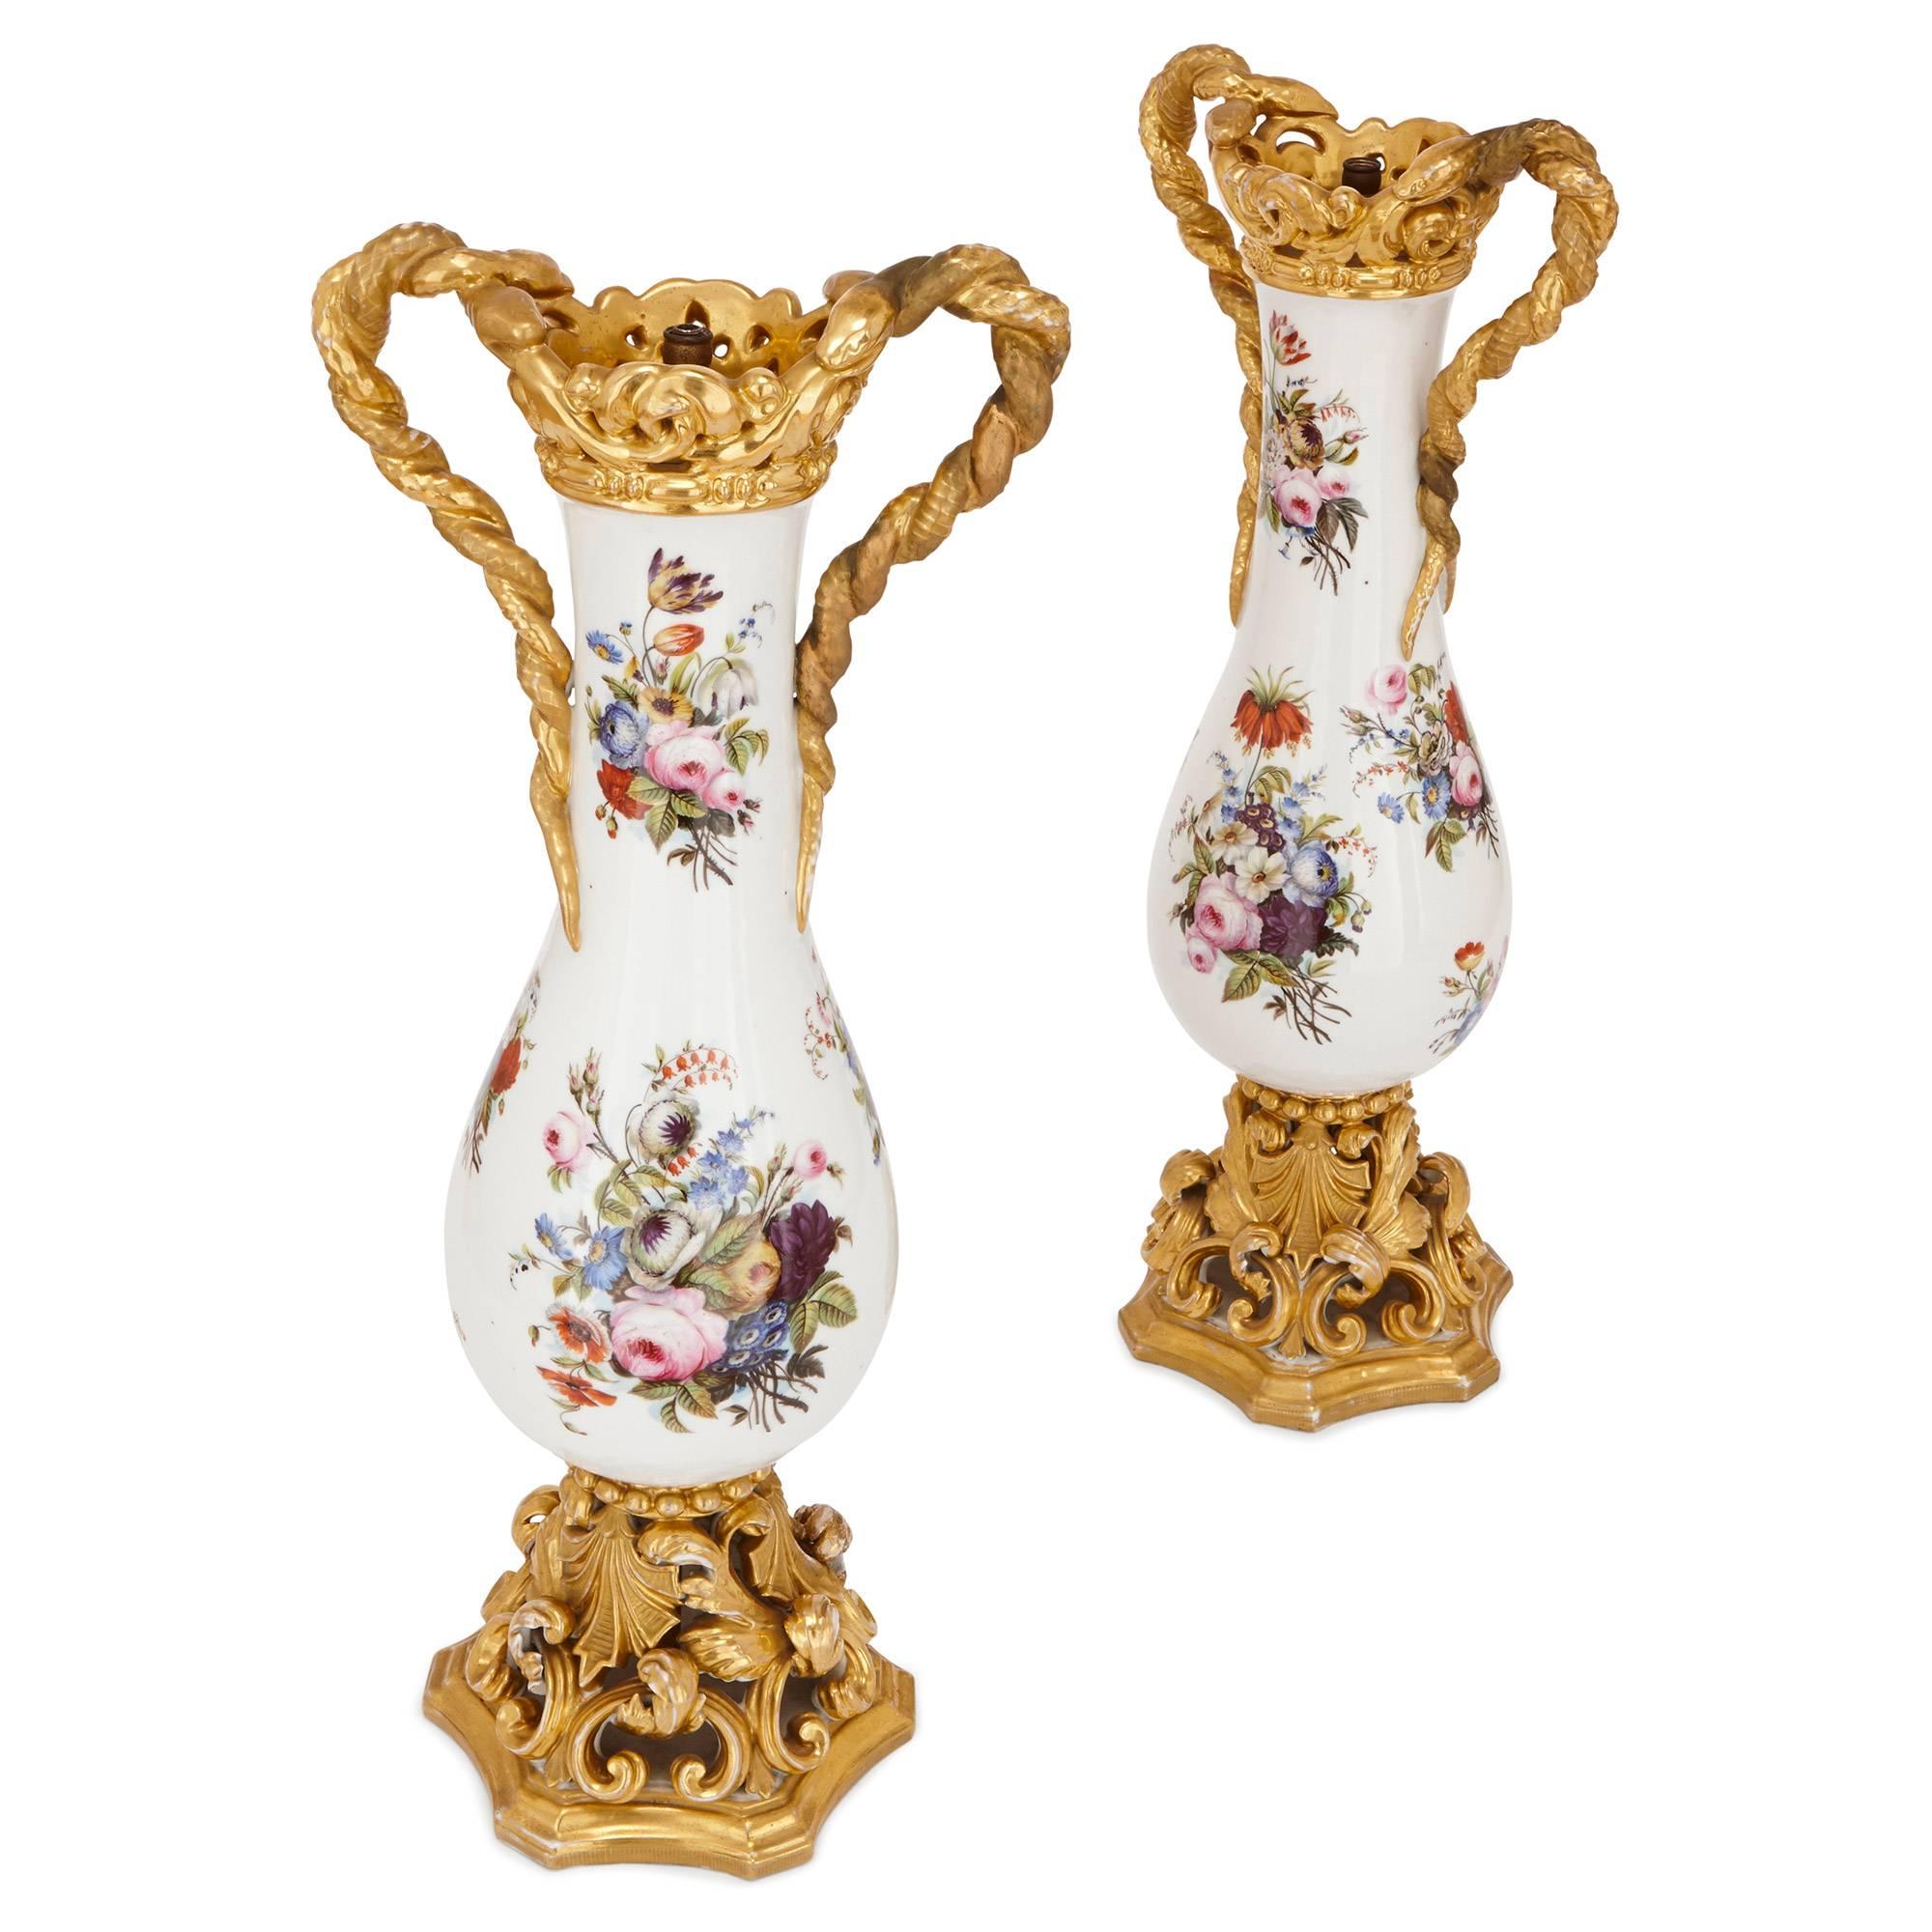 Gilt Pair of Floral Porcelain Vases in the Style of Jacob Petit